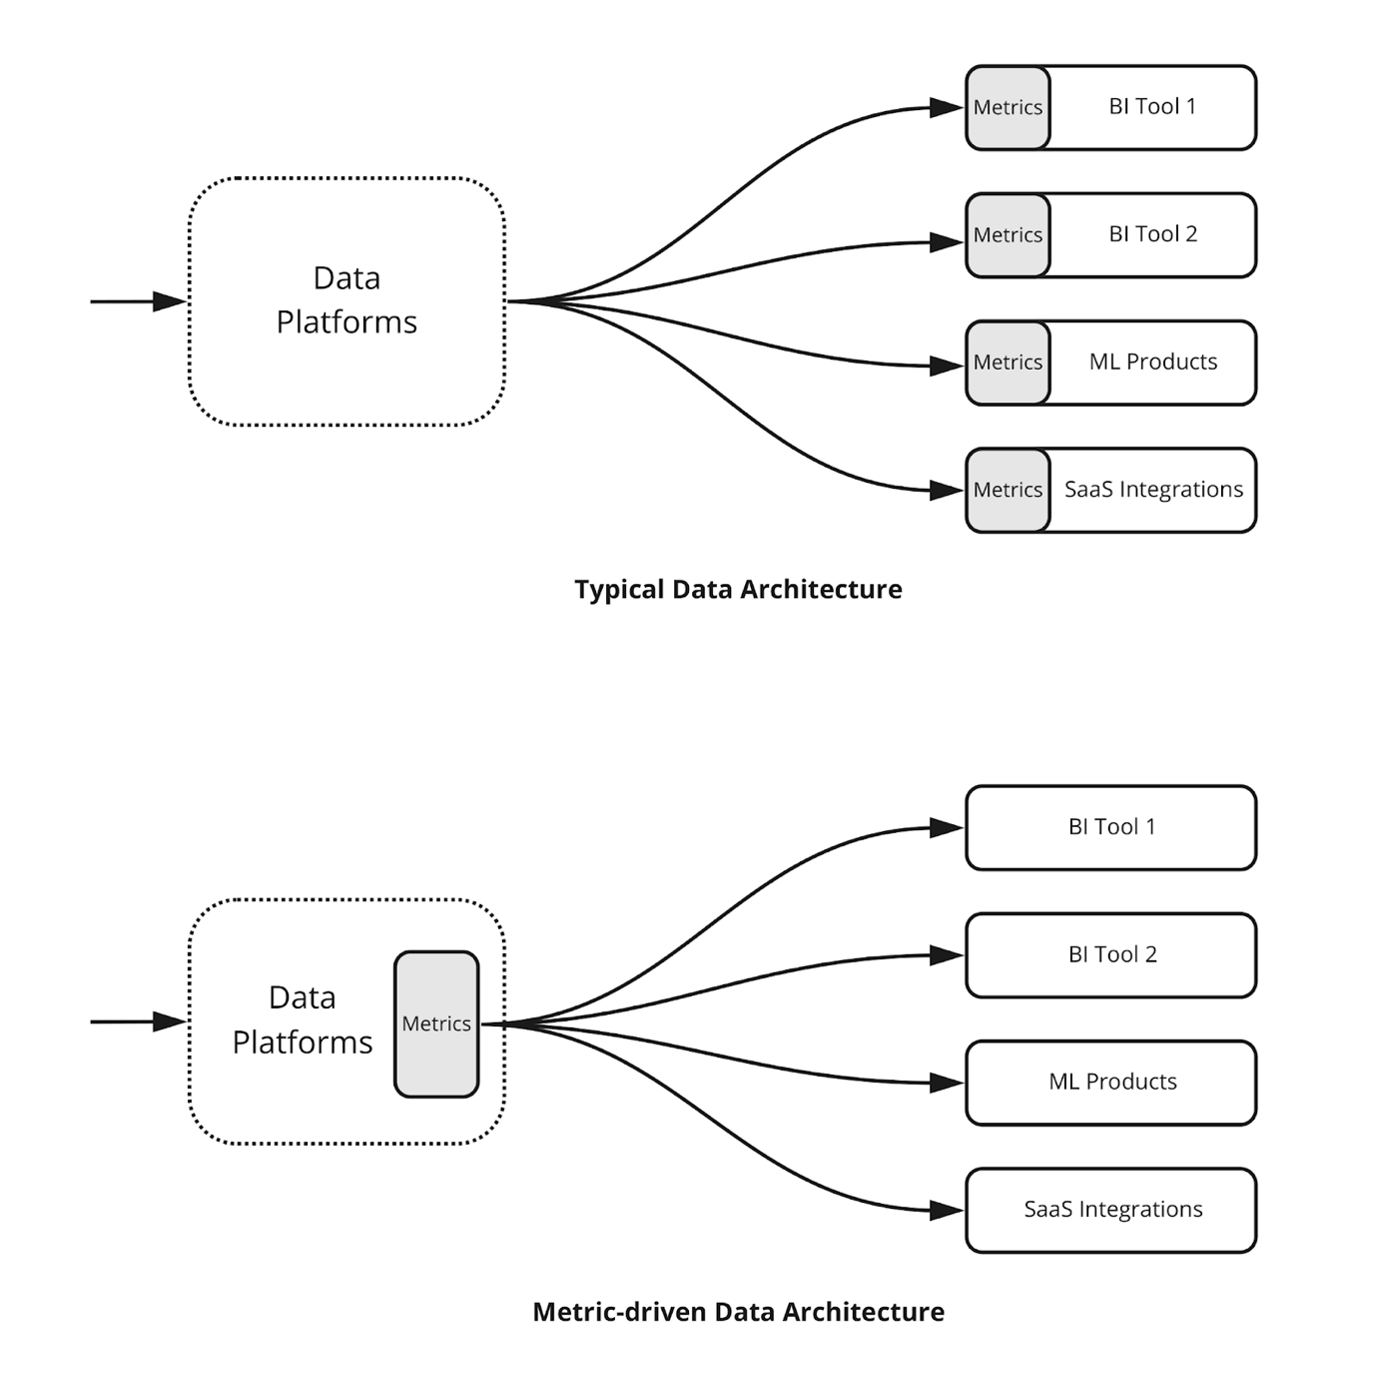 Diagram of a typical data architecture versus a metric-driven data architecture